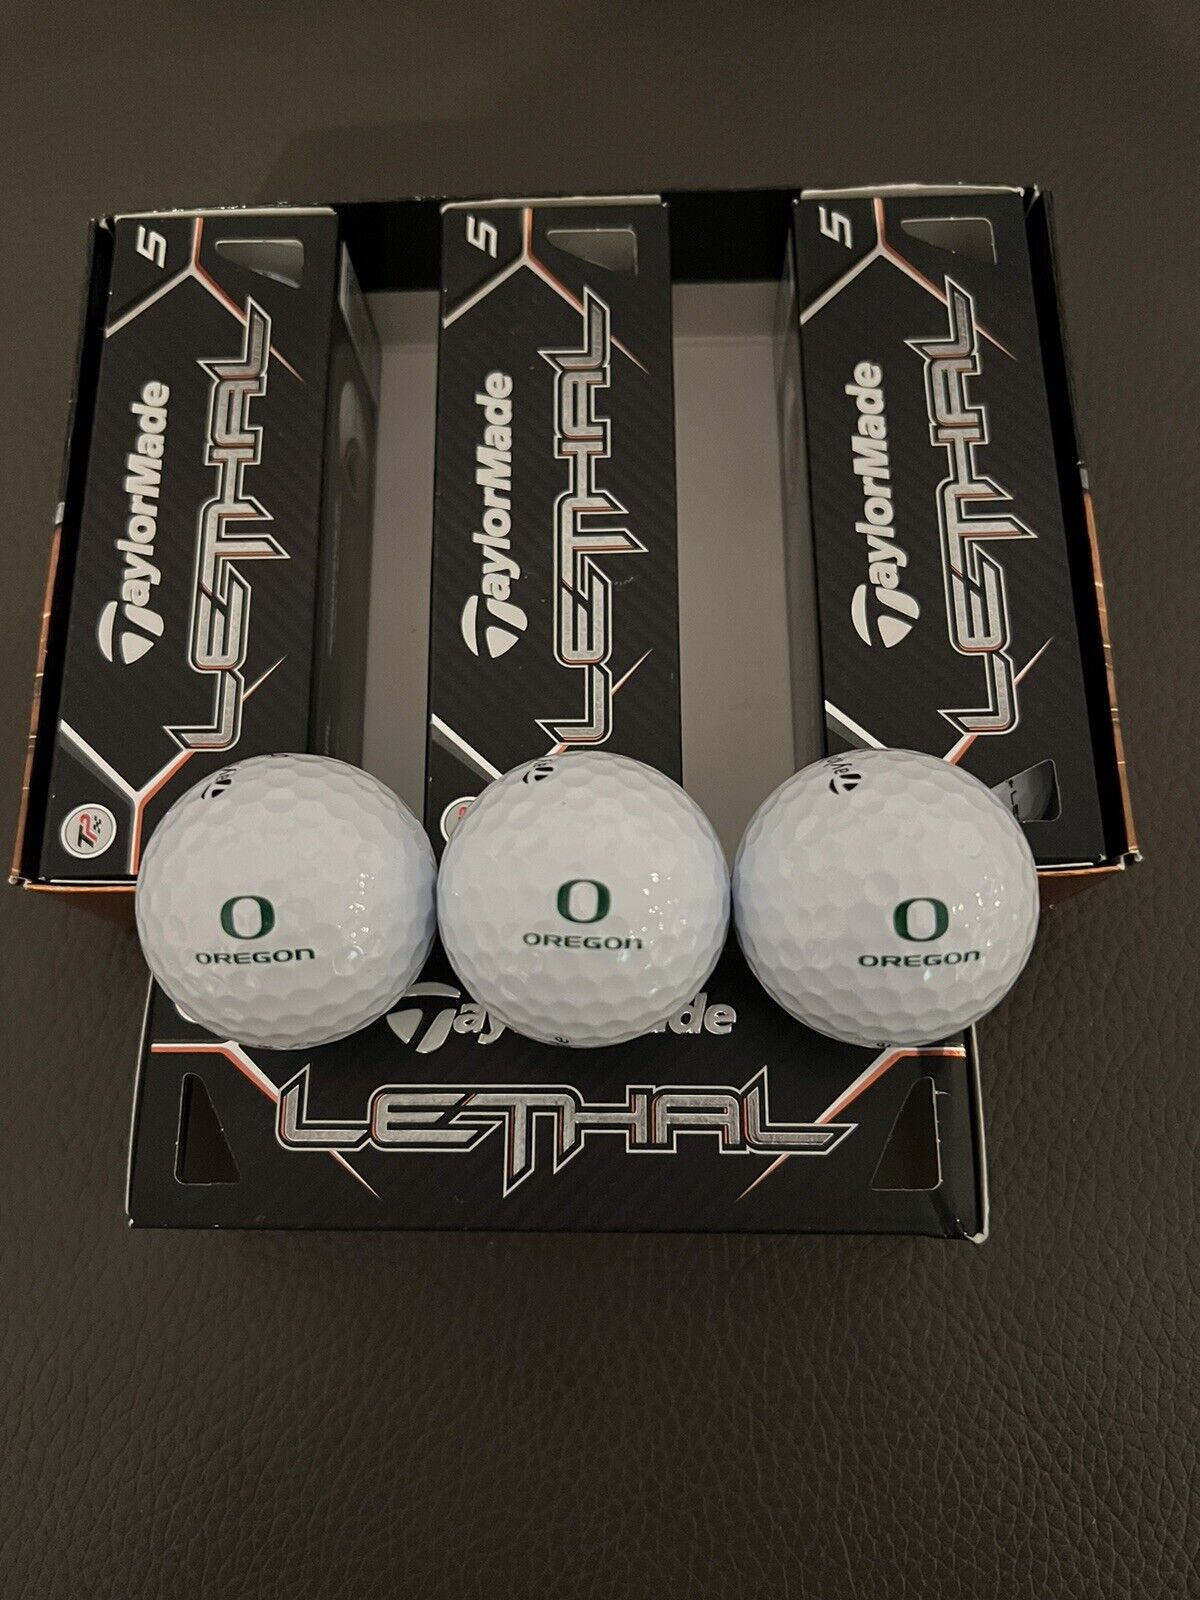 1 Dozen - Oregon Team Issue Only - TaylorMade Lethal Golf Balls